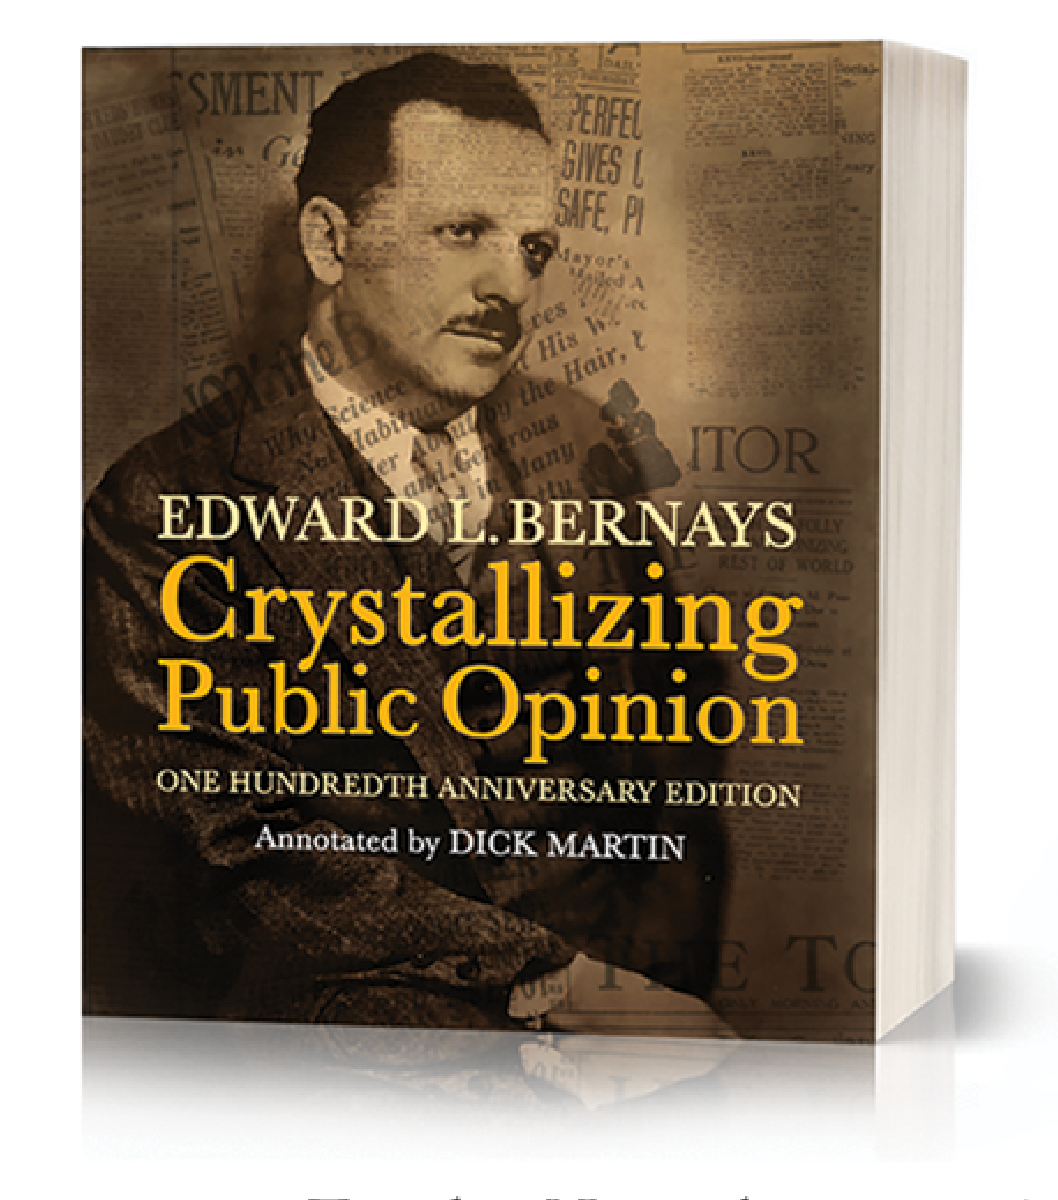 Crystallizing Public Opinion: One Hundredth Anniversary Edition